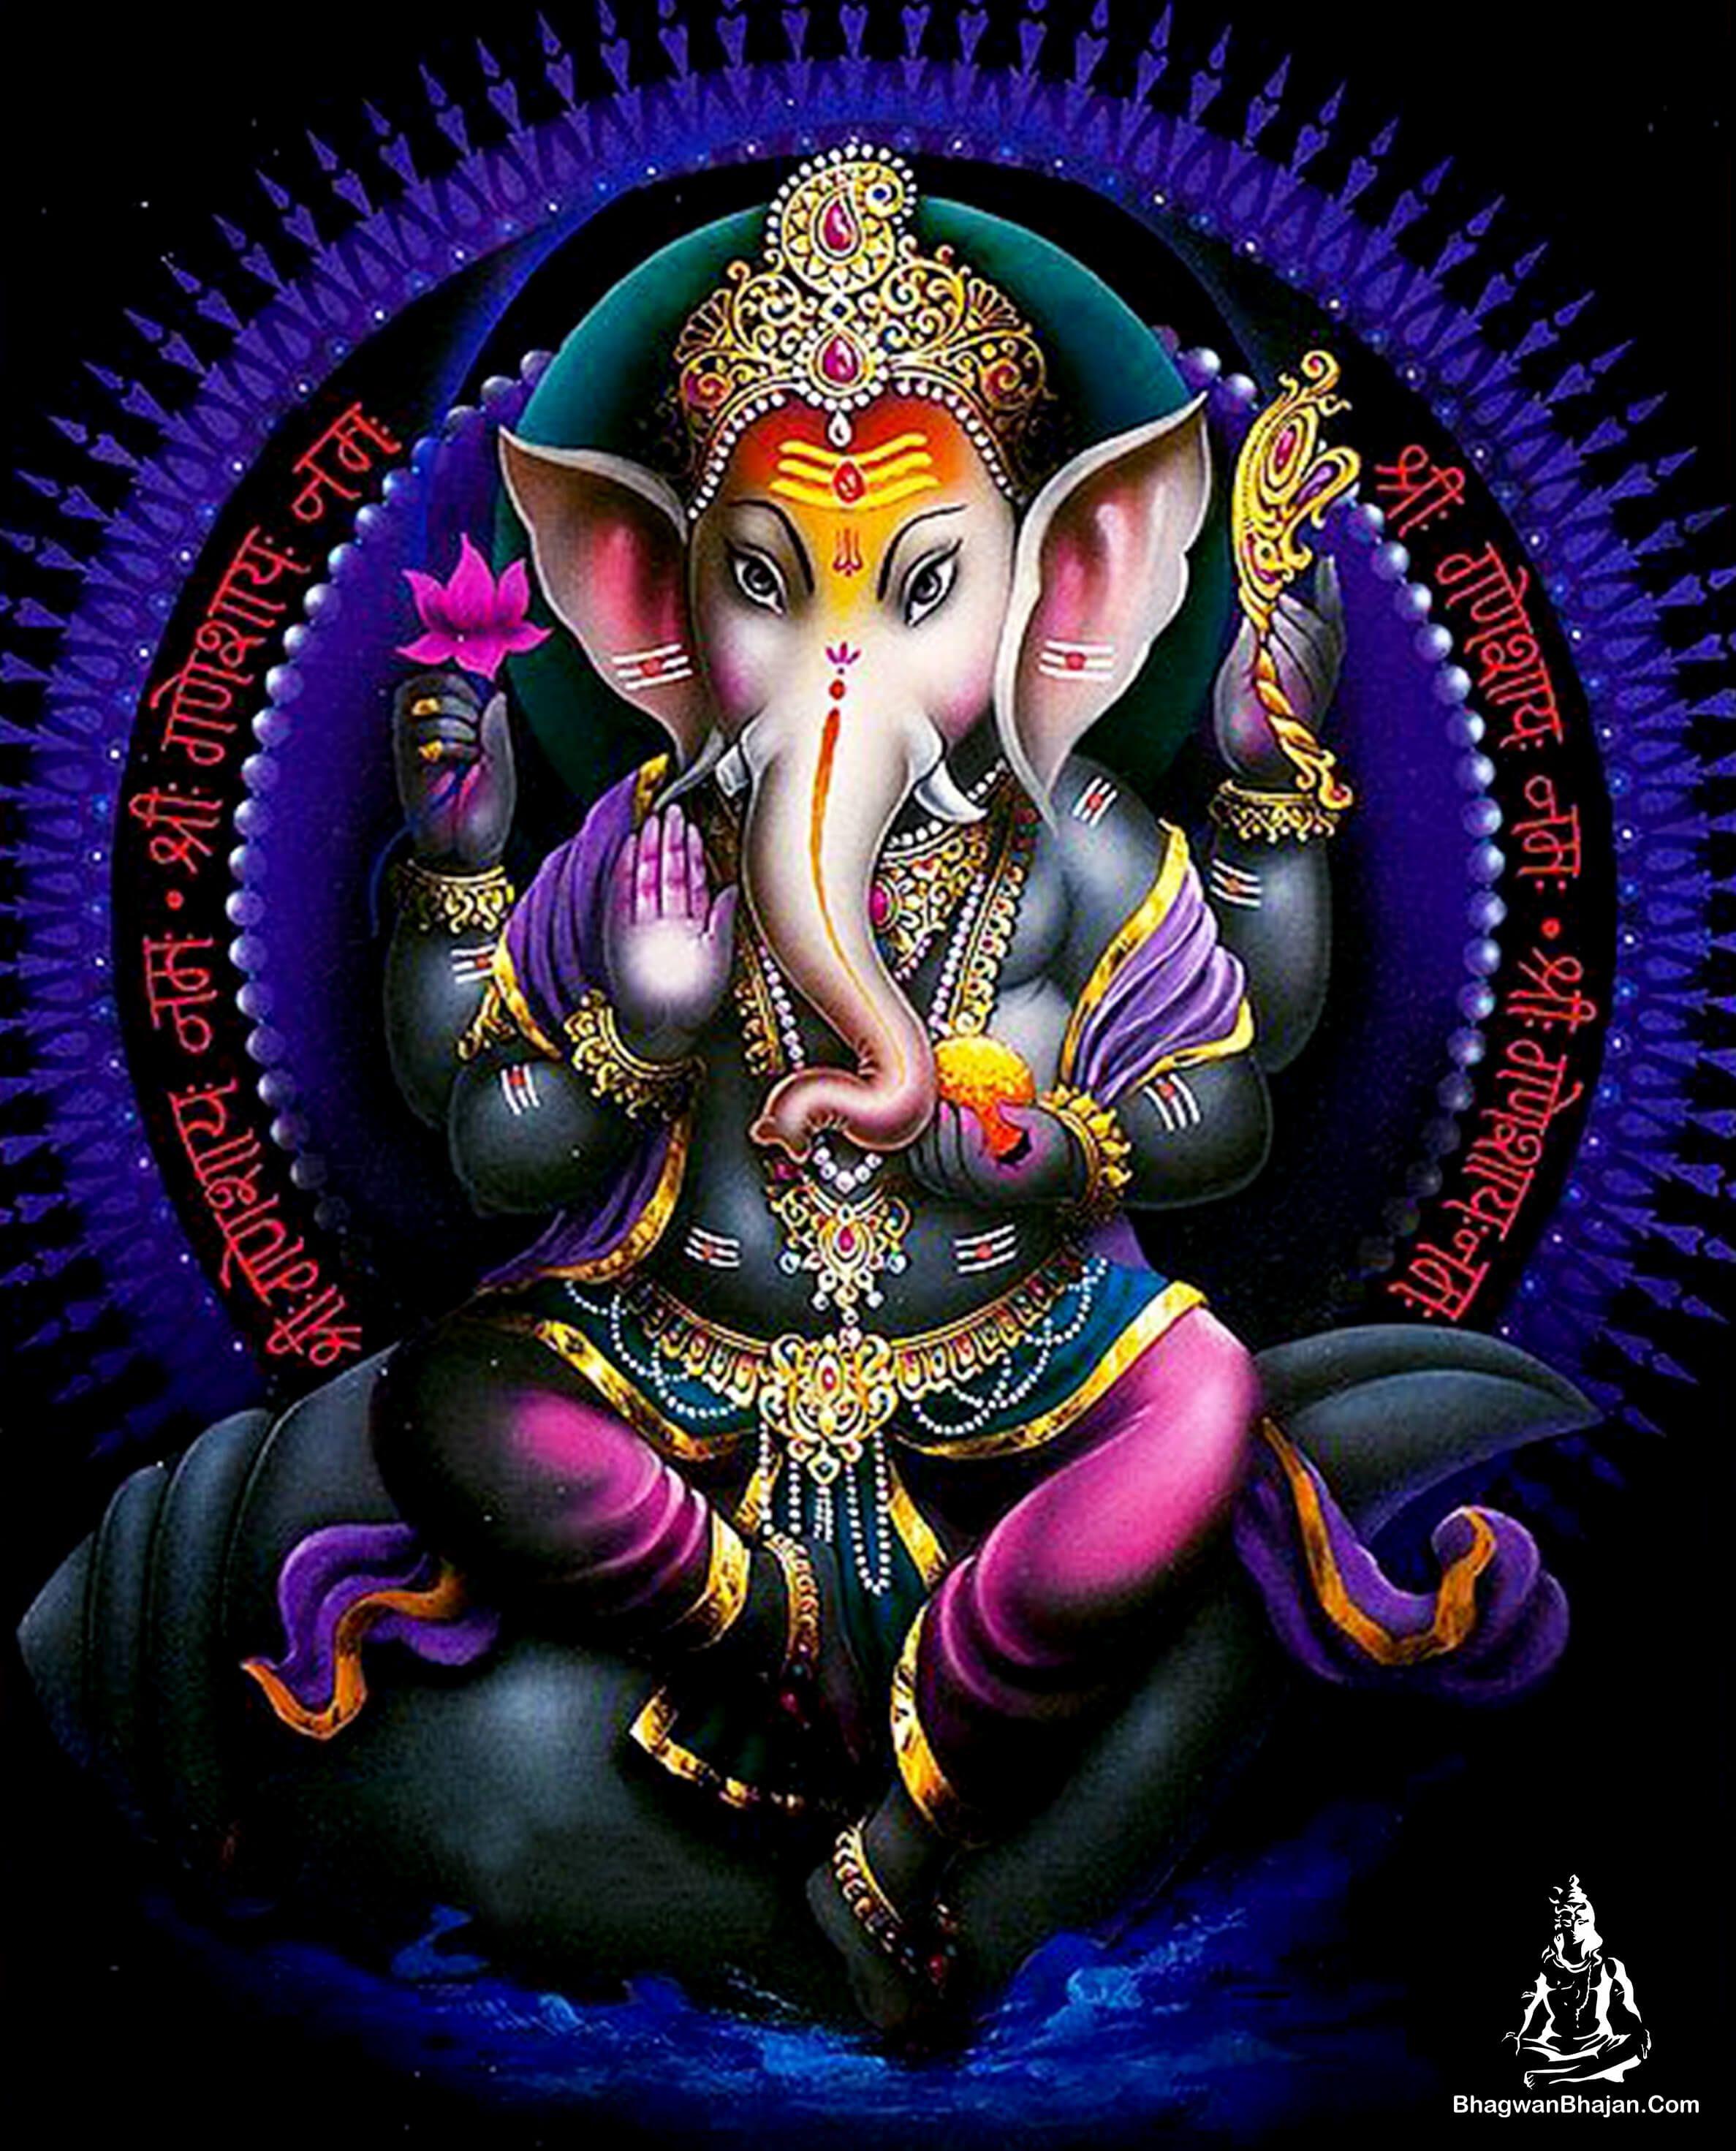 5514 Lord Ganesha Poster Images Stock Photos  Vectors  Shutterstock